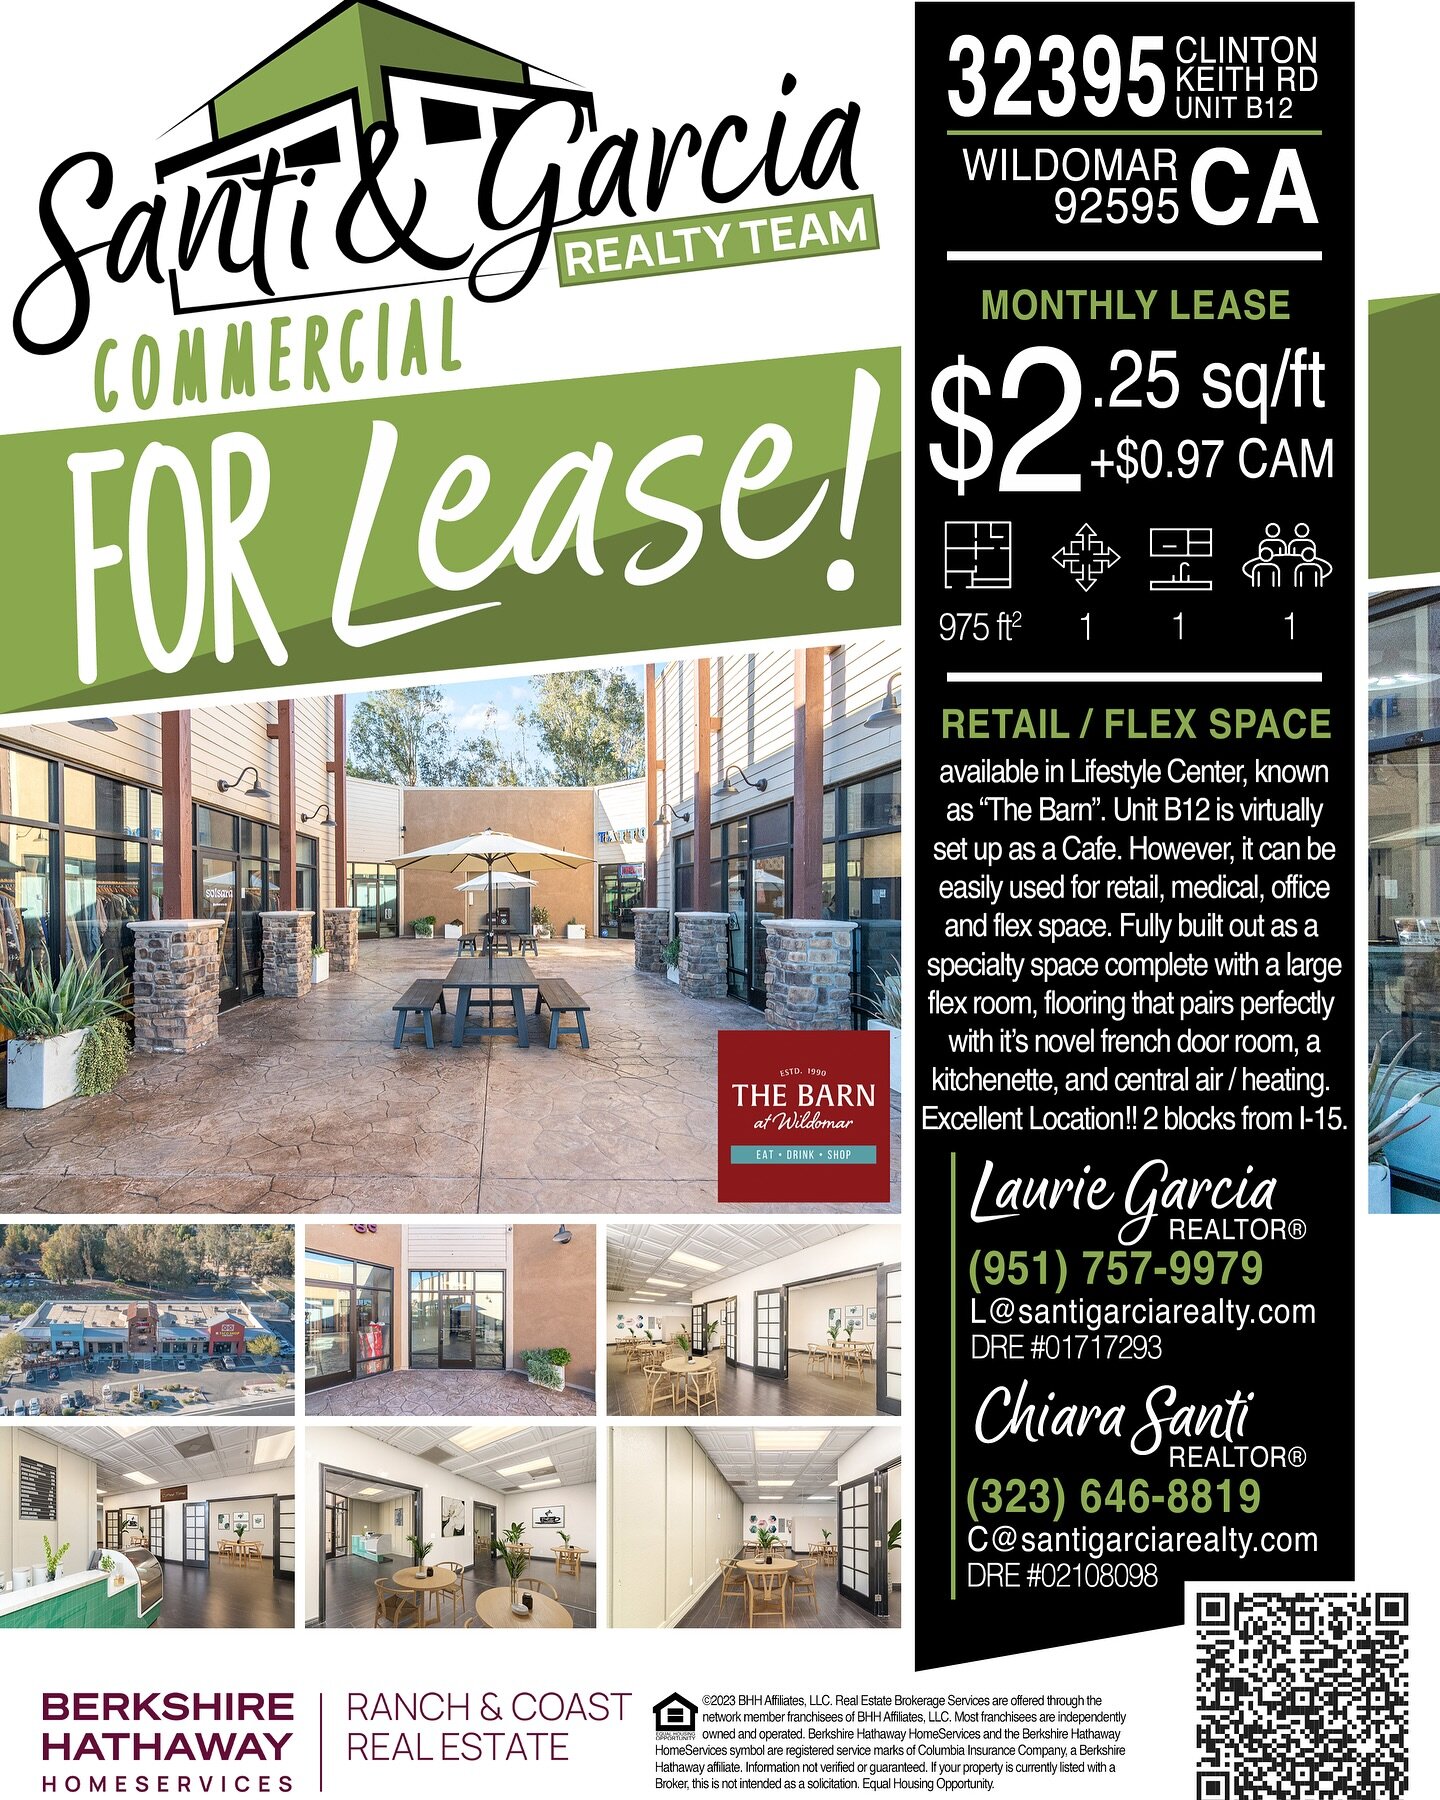 📌FOR LEASE‼️

📍32395 Clinton Keith Rd, Unit B12, Wildomar, CA. 92595

👉More info at santigarciarealty.com

#SantiGarciaRealty #realestate #realtor #realty #carealestategroup #commercialrealestate #residentialrealestate